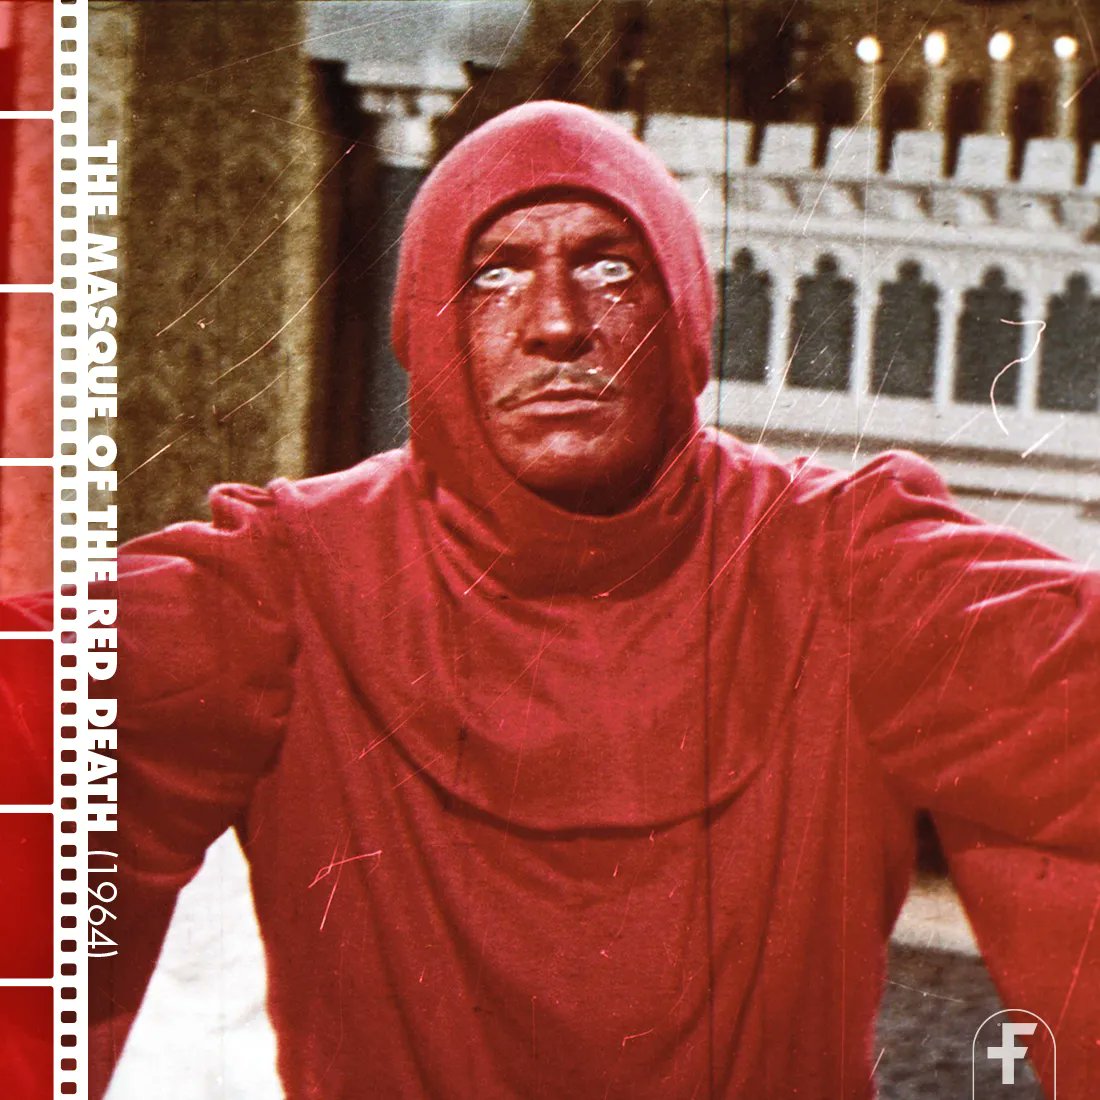 Horror has a face.

On this day in 1964: THE MASQUE OF THE RED DEATH was released.